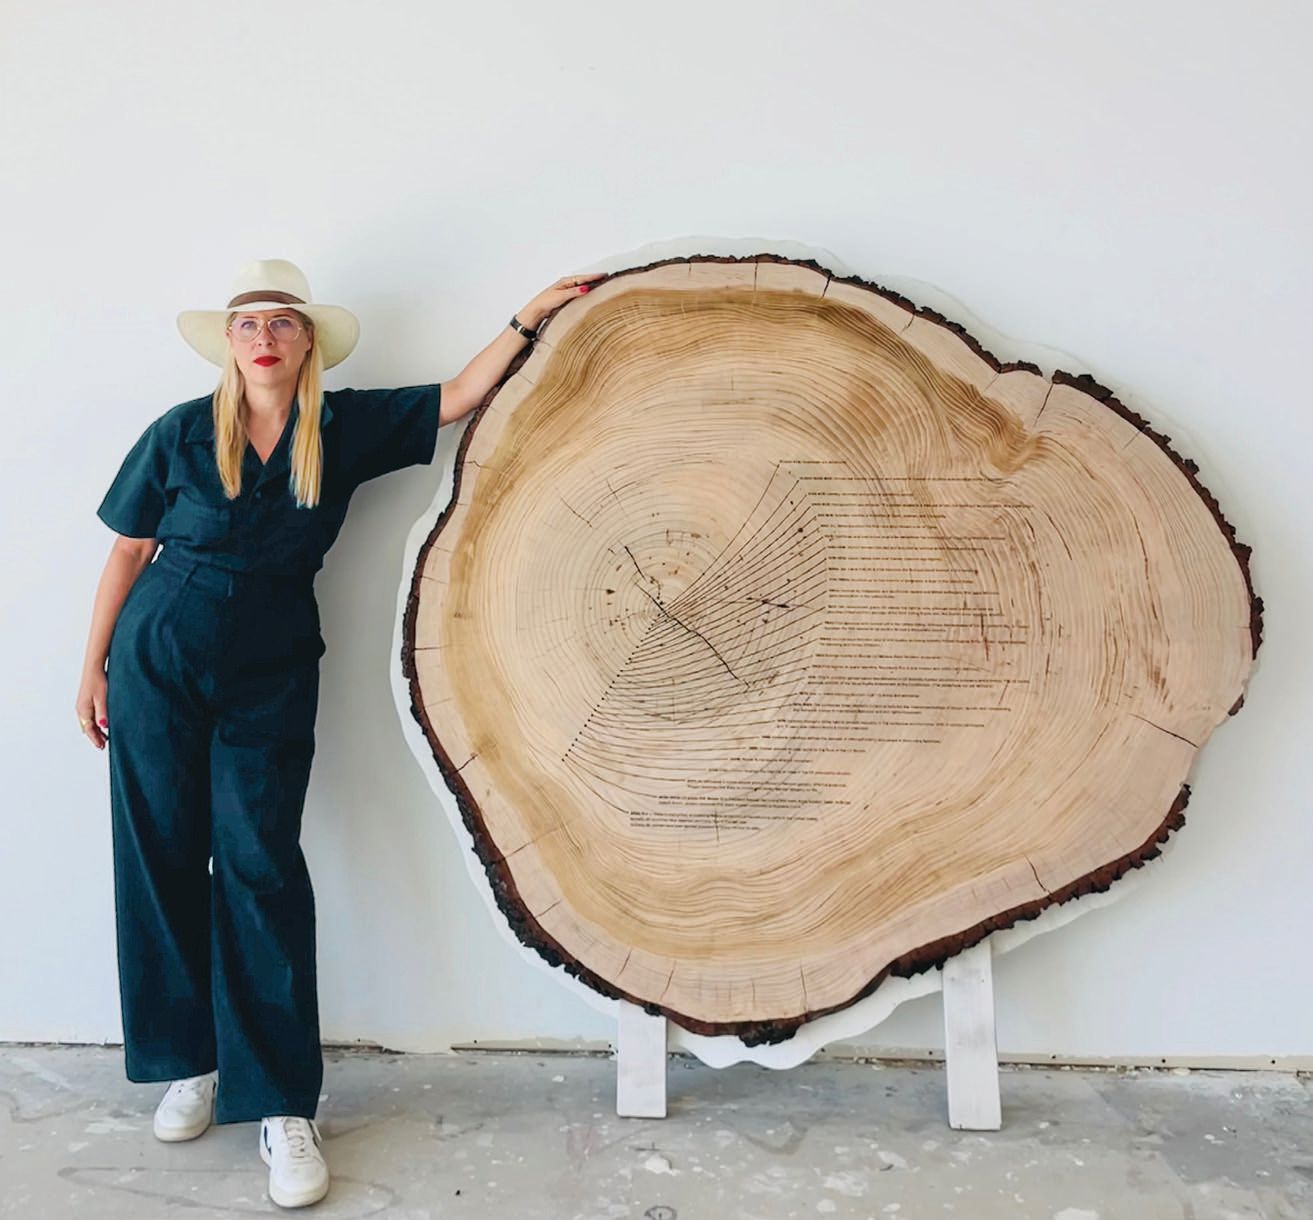 Tiffany Shlain and “Dendrofemonology” from her new show, Human Nature PHOTO: BY ELAINE MELLIS